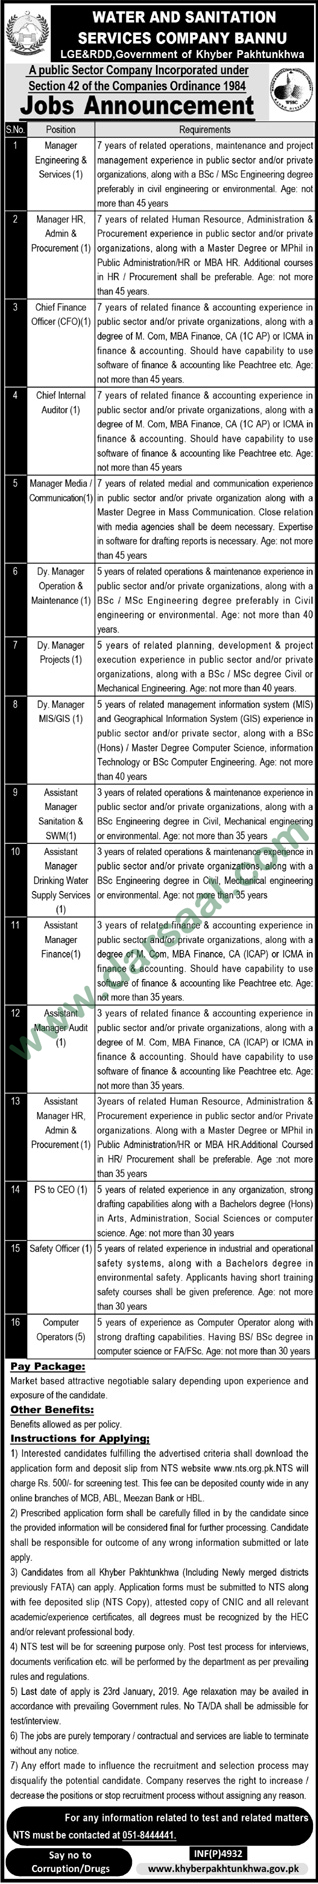 Media Manager Jobs in Water & Sanitation Services Company Bannu in Bannu - Dec 27, 2018